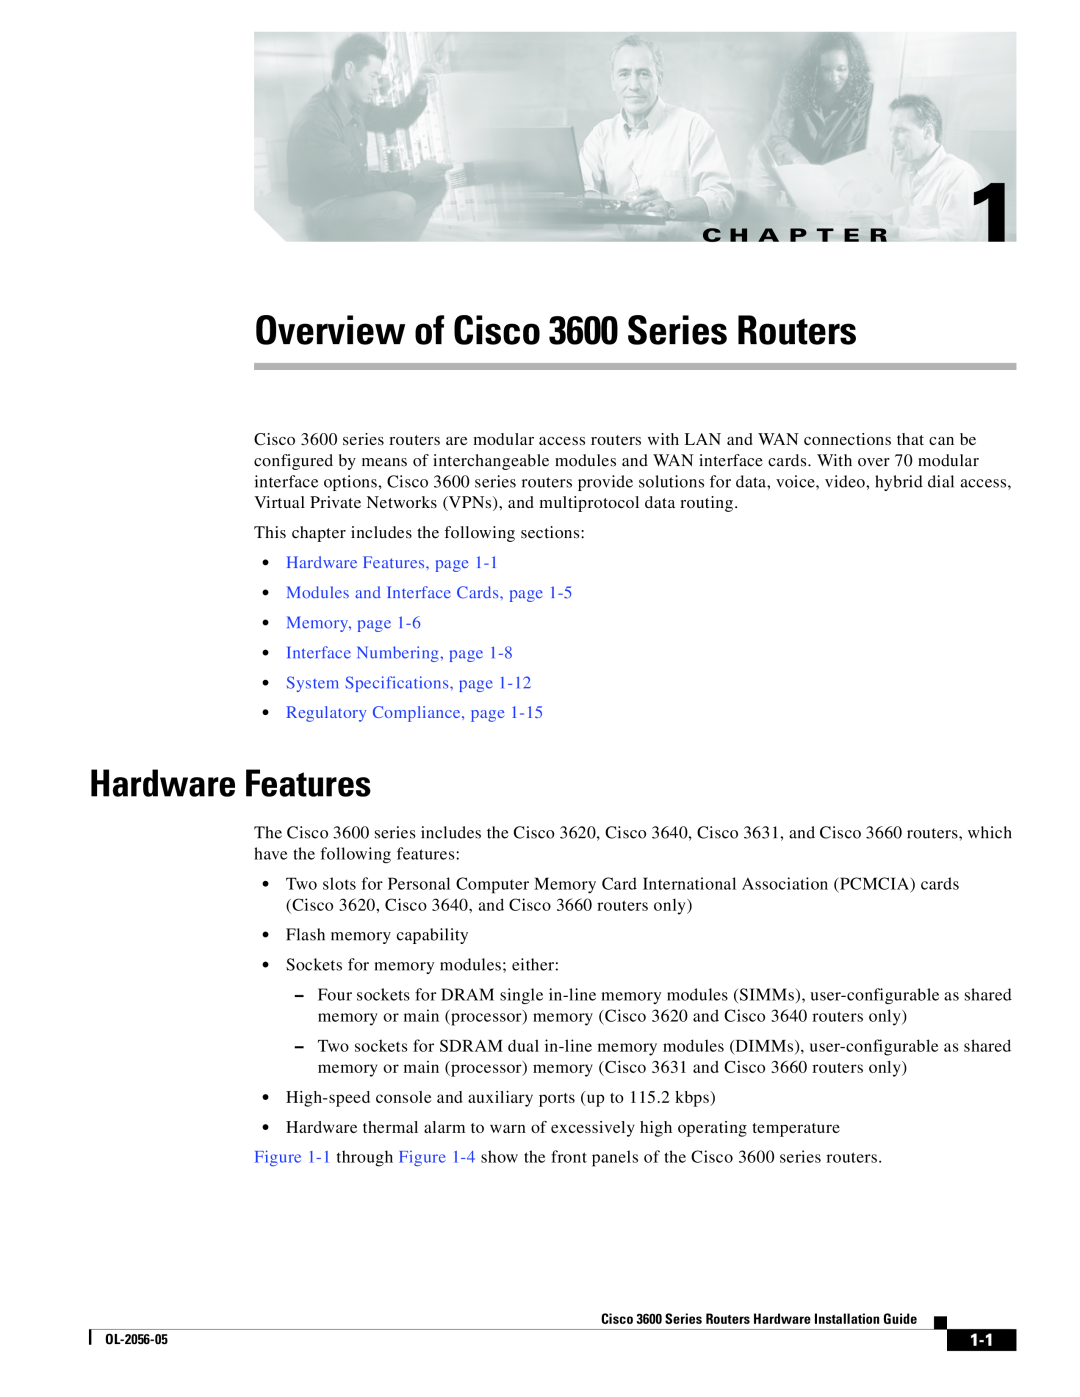 Cisco Systems specifications Hardware Features, C H A P T E R, Overview of Cisco 3600 Series Routers 